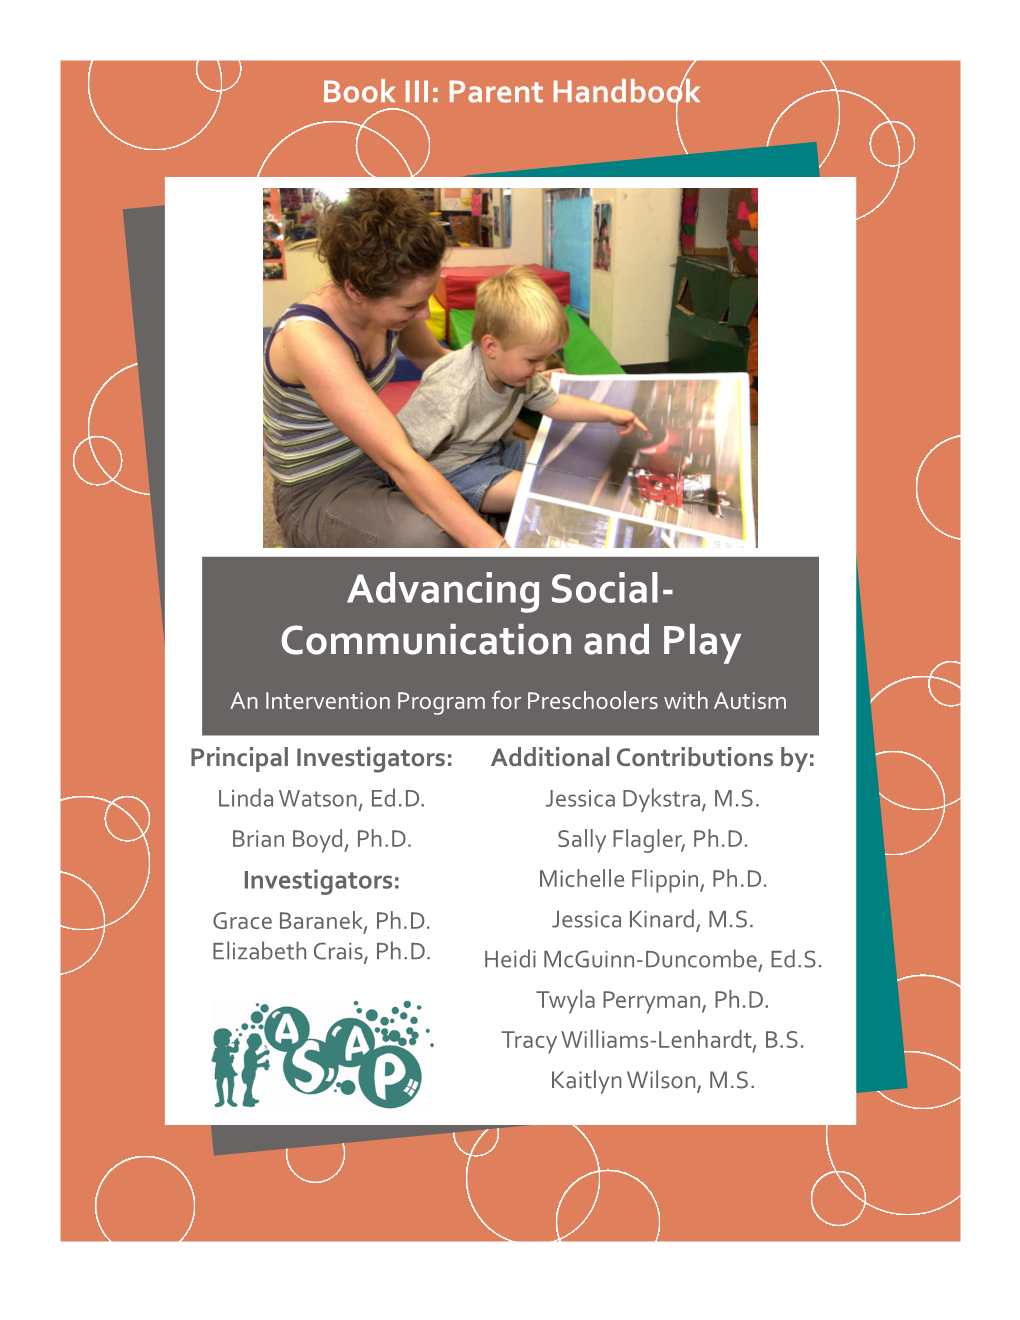 Advancing Social- Communication and Play an Intervention Program for Preschoolers with Autism